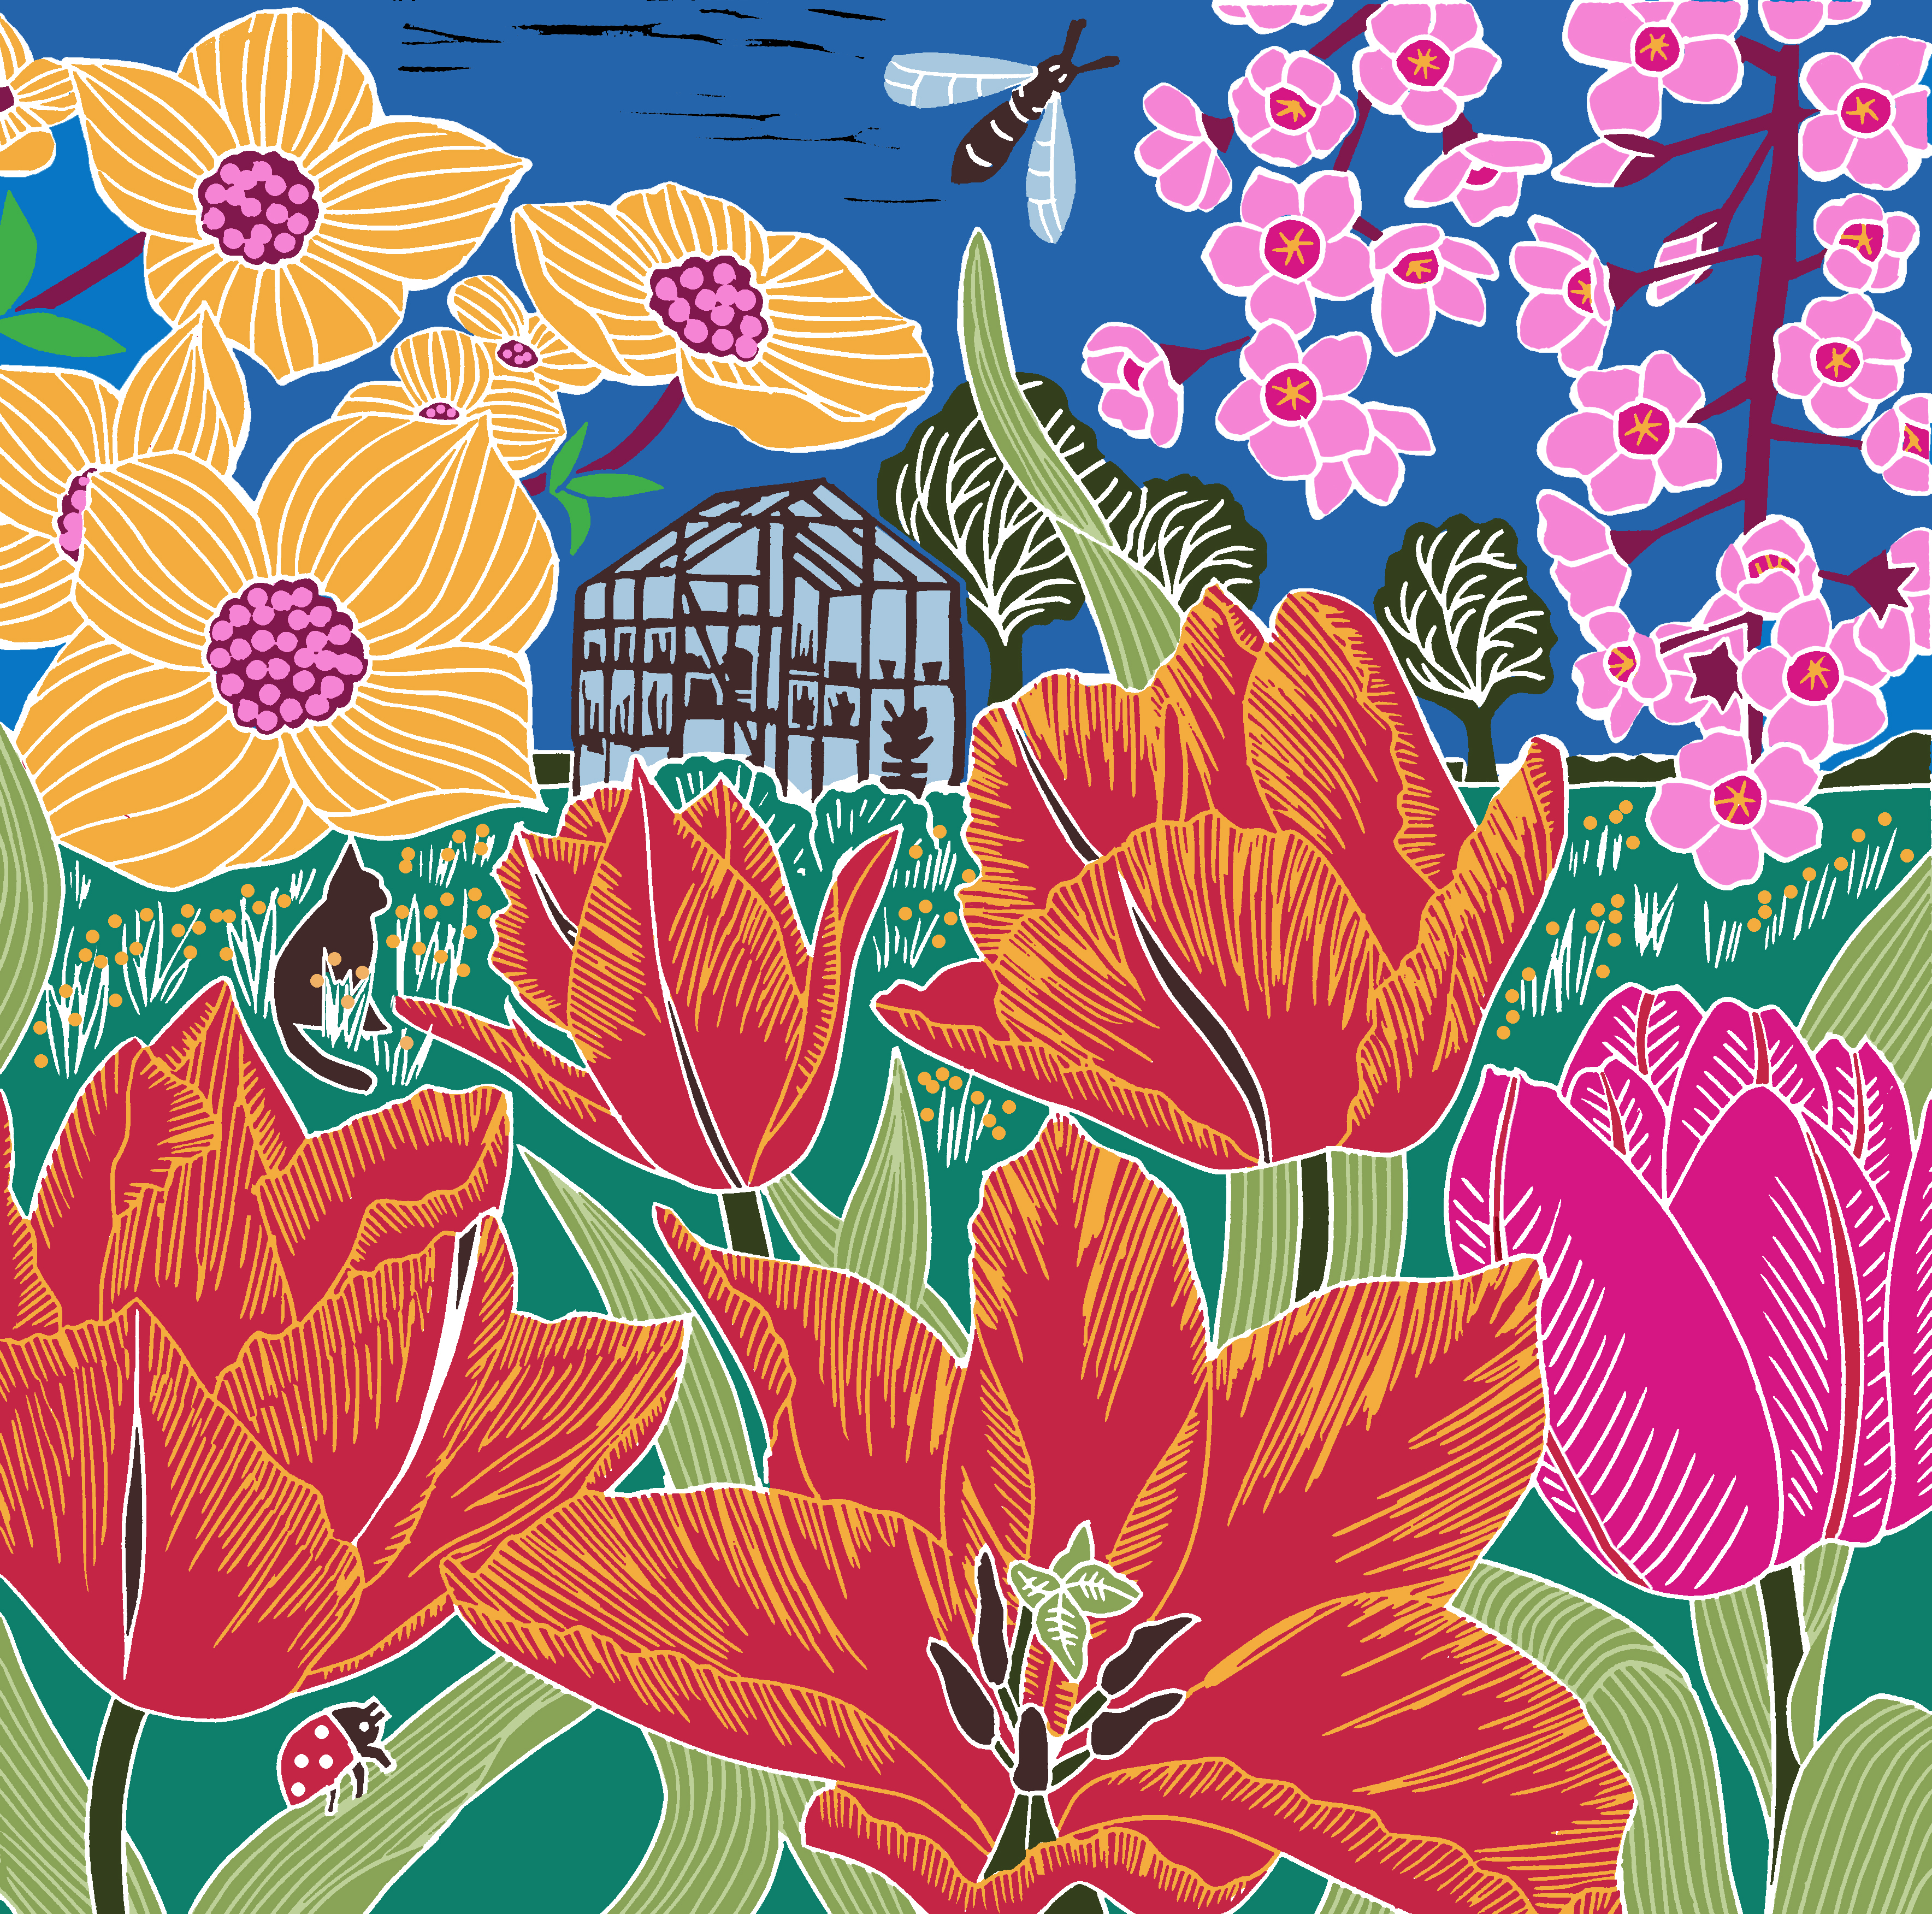 Above: Abundant Tulips by Kate Heiss. (Represented by Jehane)